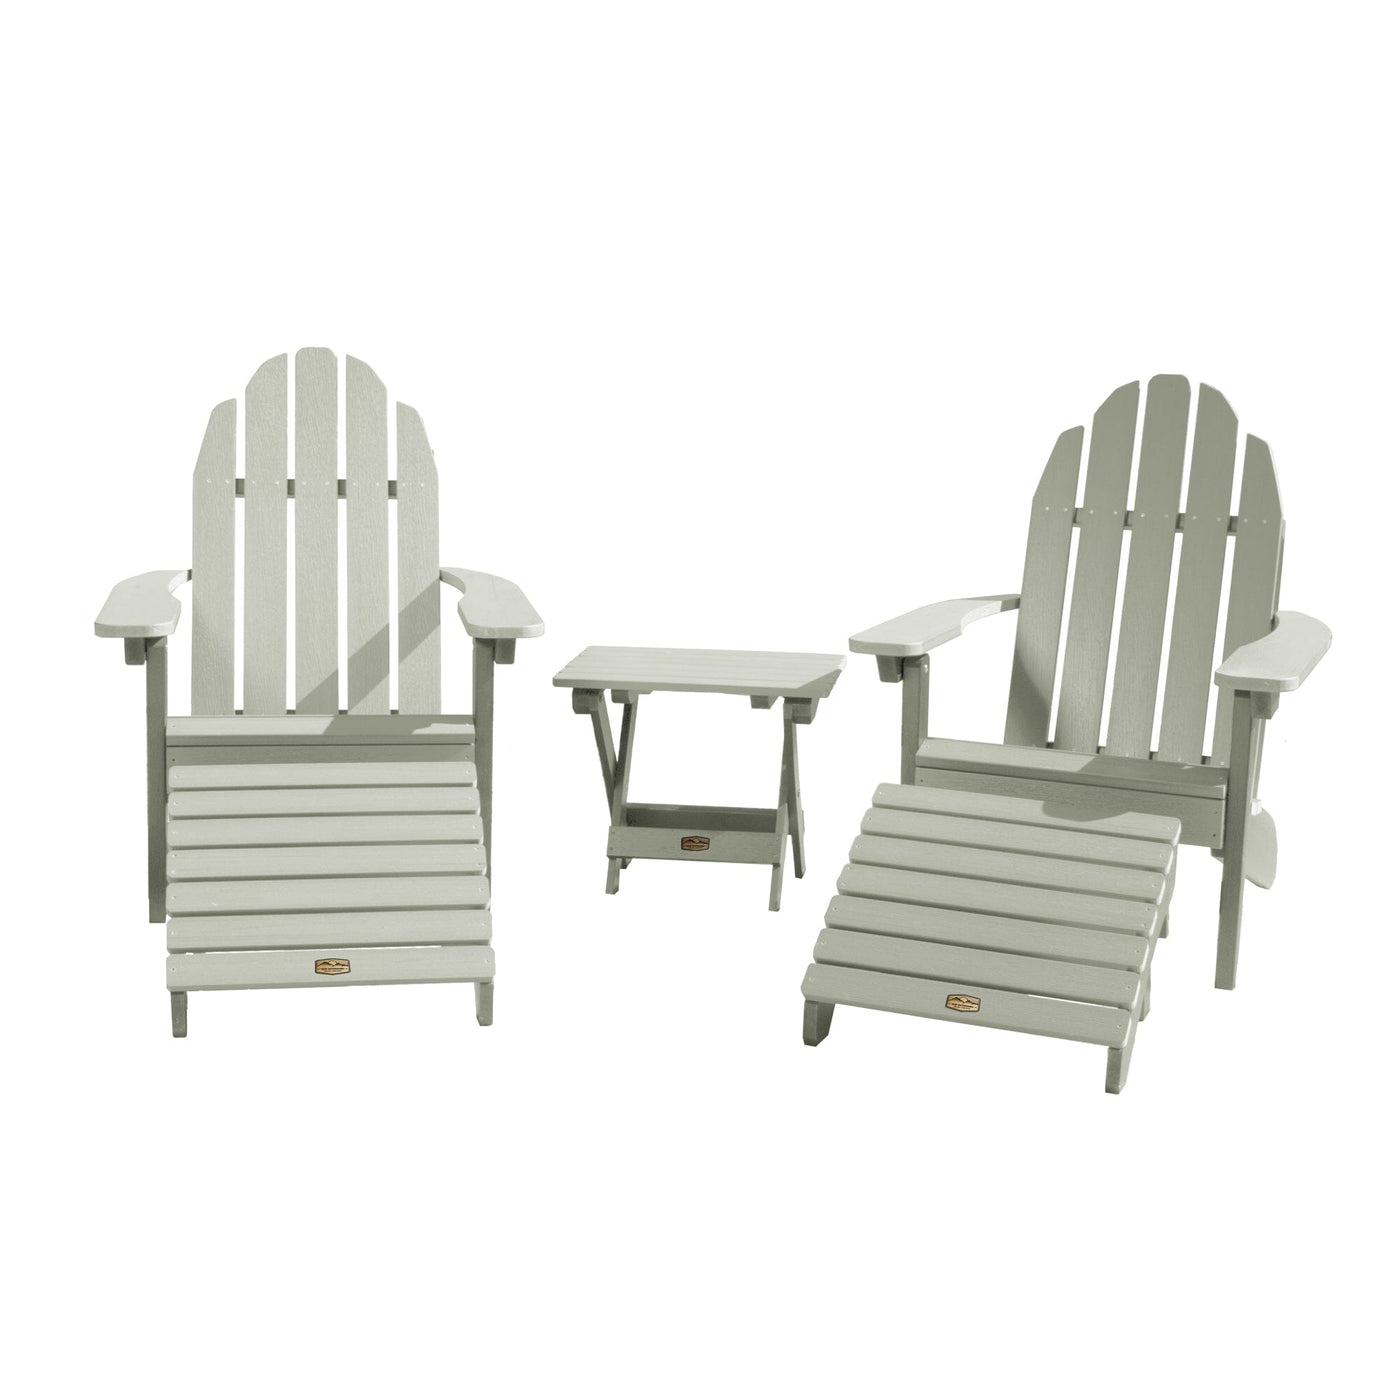 2 Essential Adirondack Chairs with Folding Side Table & 2 Folding Ottomans Kitted Sets ELK OUTDOORS® Eucalyptus 